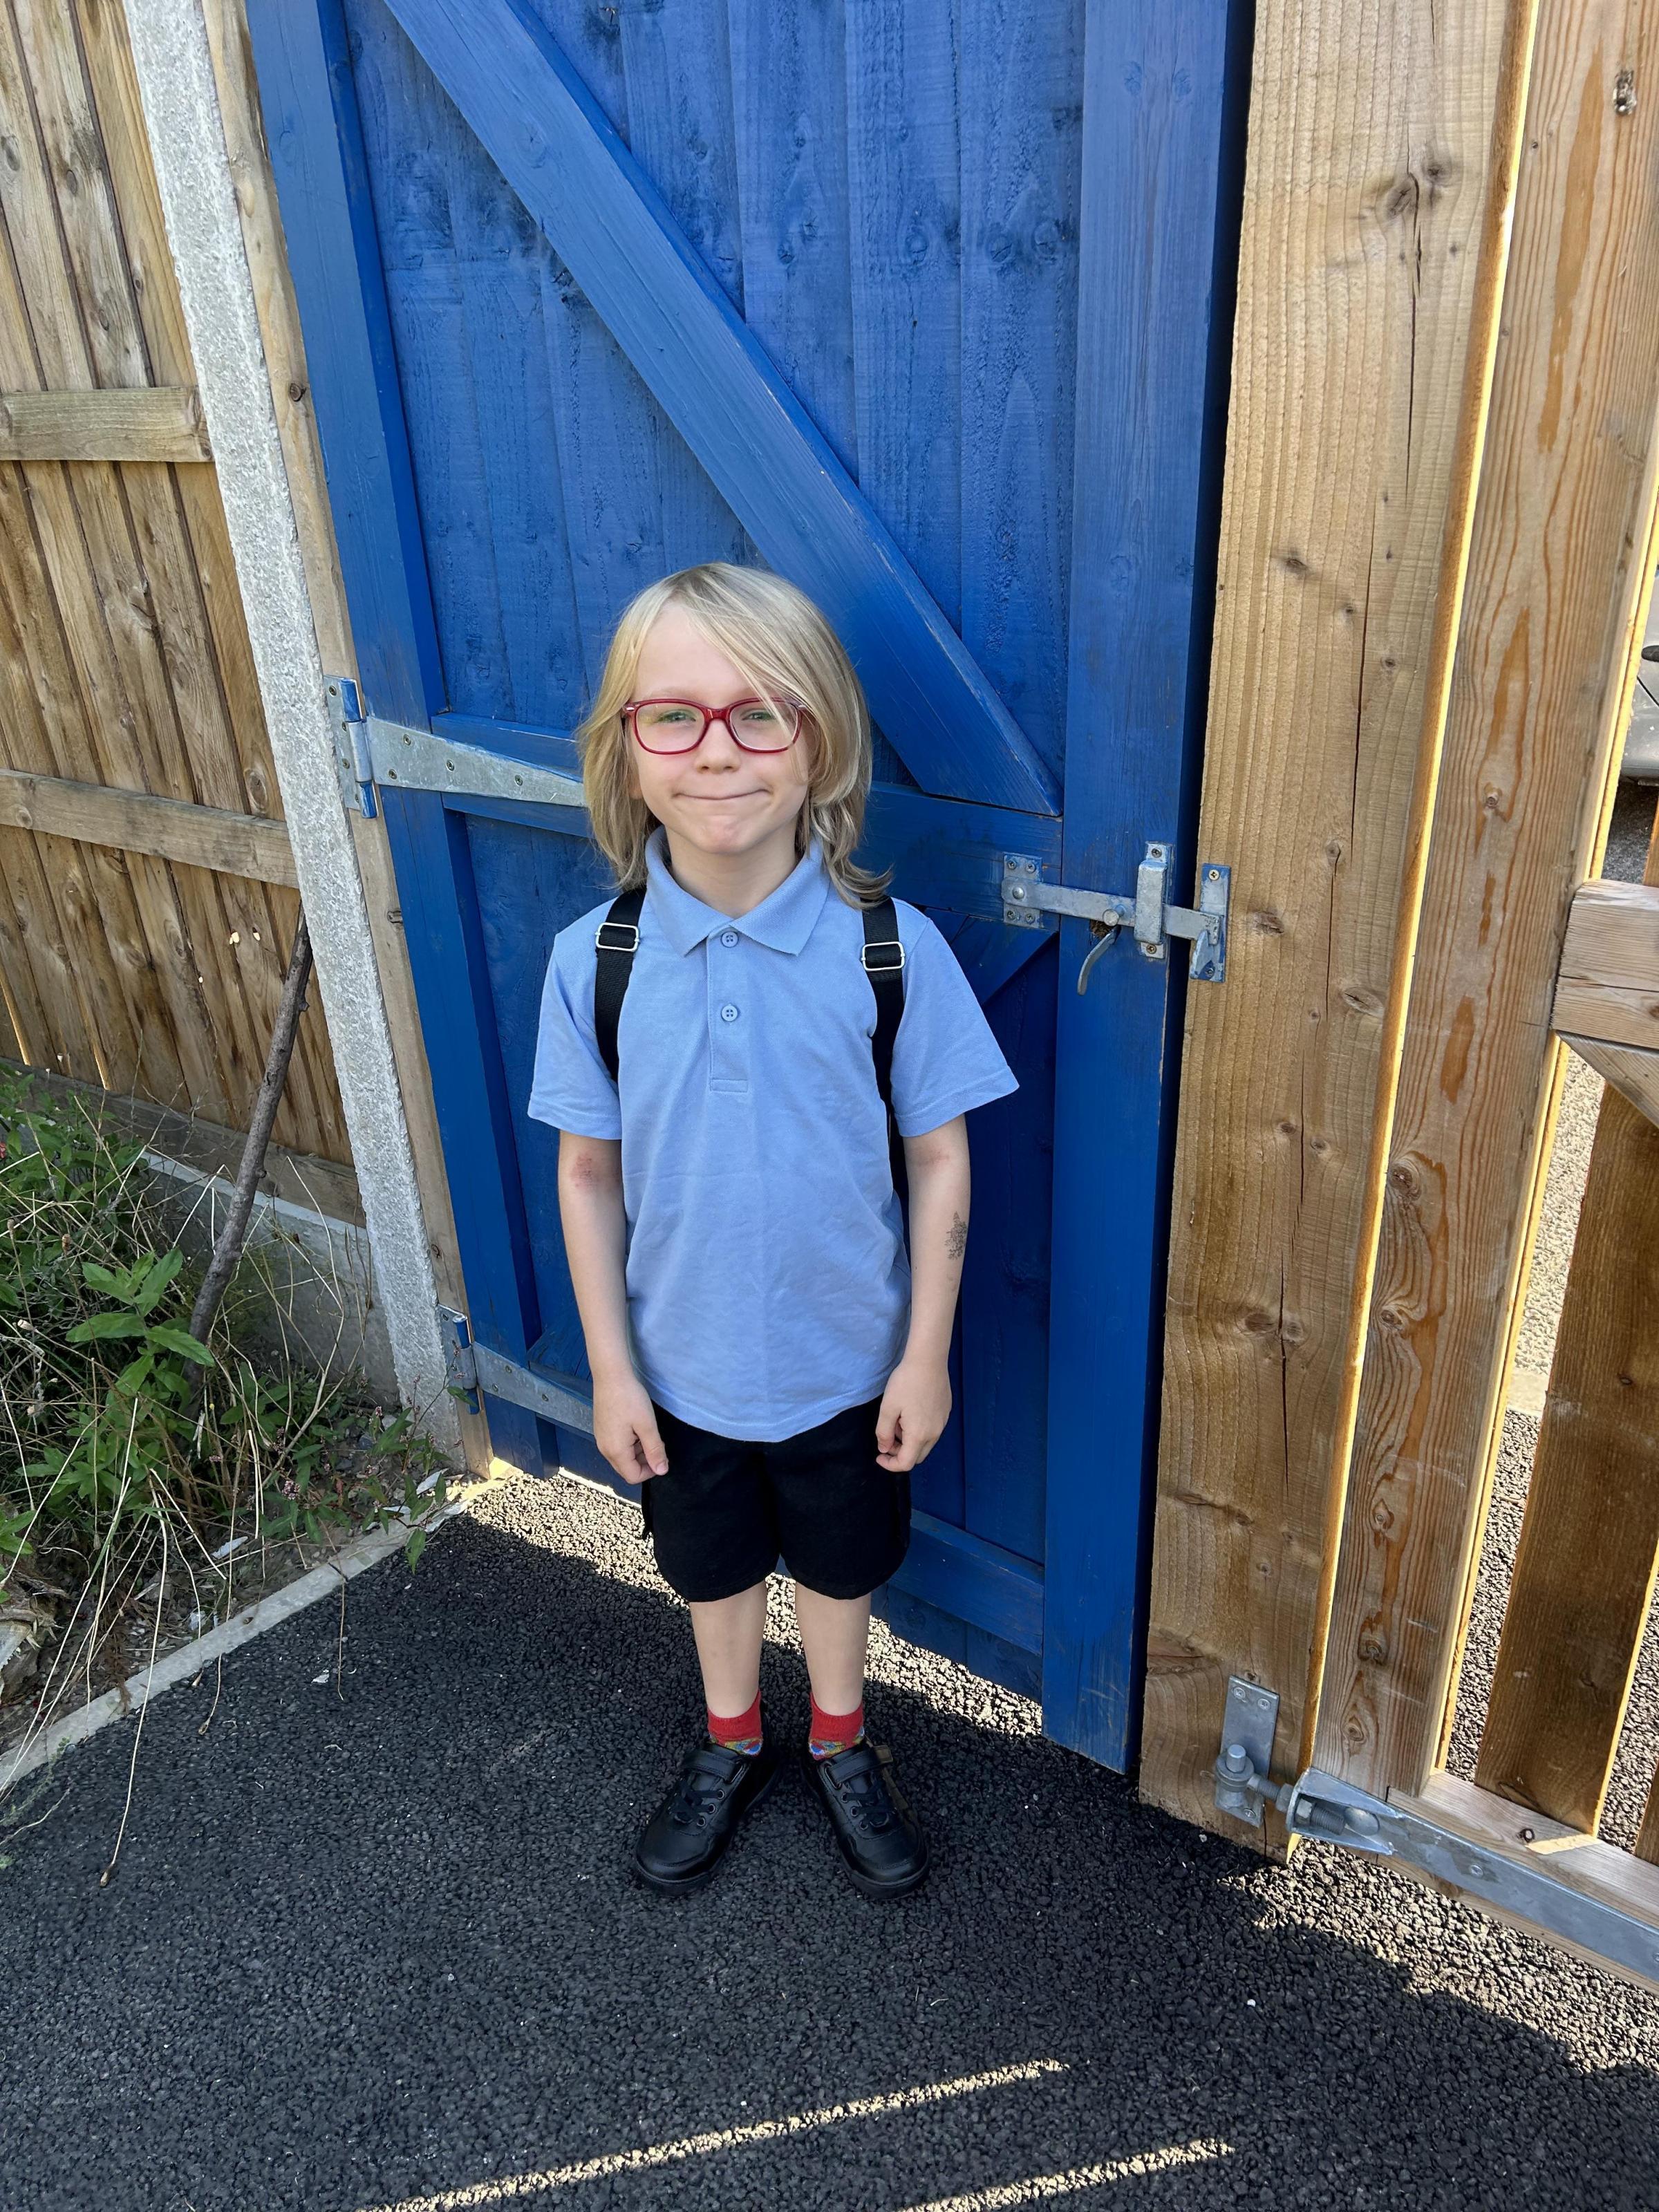 Michelle Hughes, from Caia Park: Benjamin Hughes, very excited to be starting Year 3 at Gwenfro CP School, in his new uniform and new glasses ready for the new term.